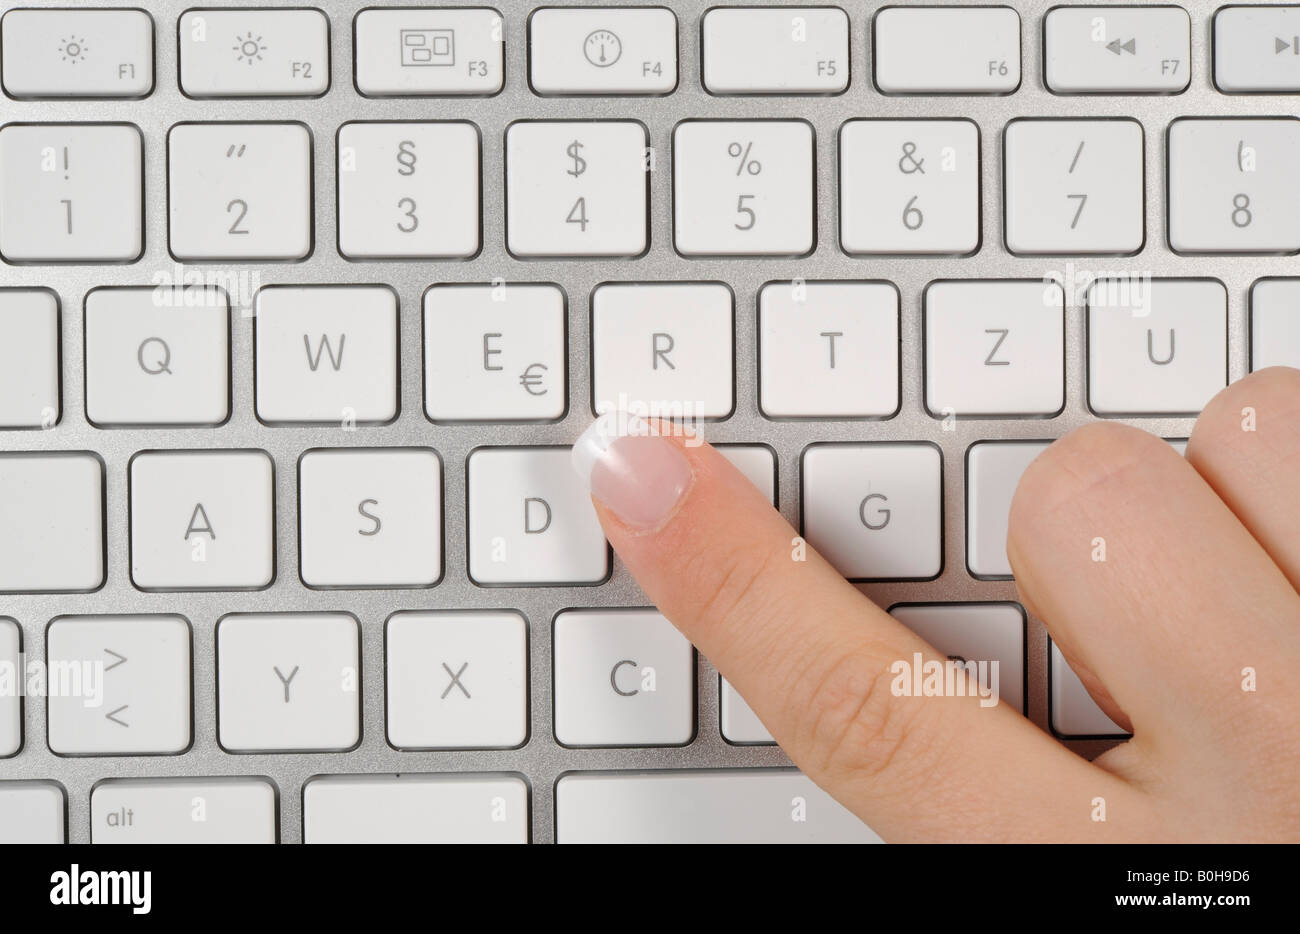 Apple Mac Book Pro keyboard, laptop, finger pointing at the Euro symbol  Stock Photo - Alamy